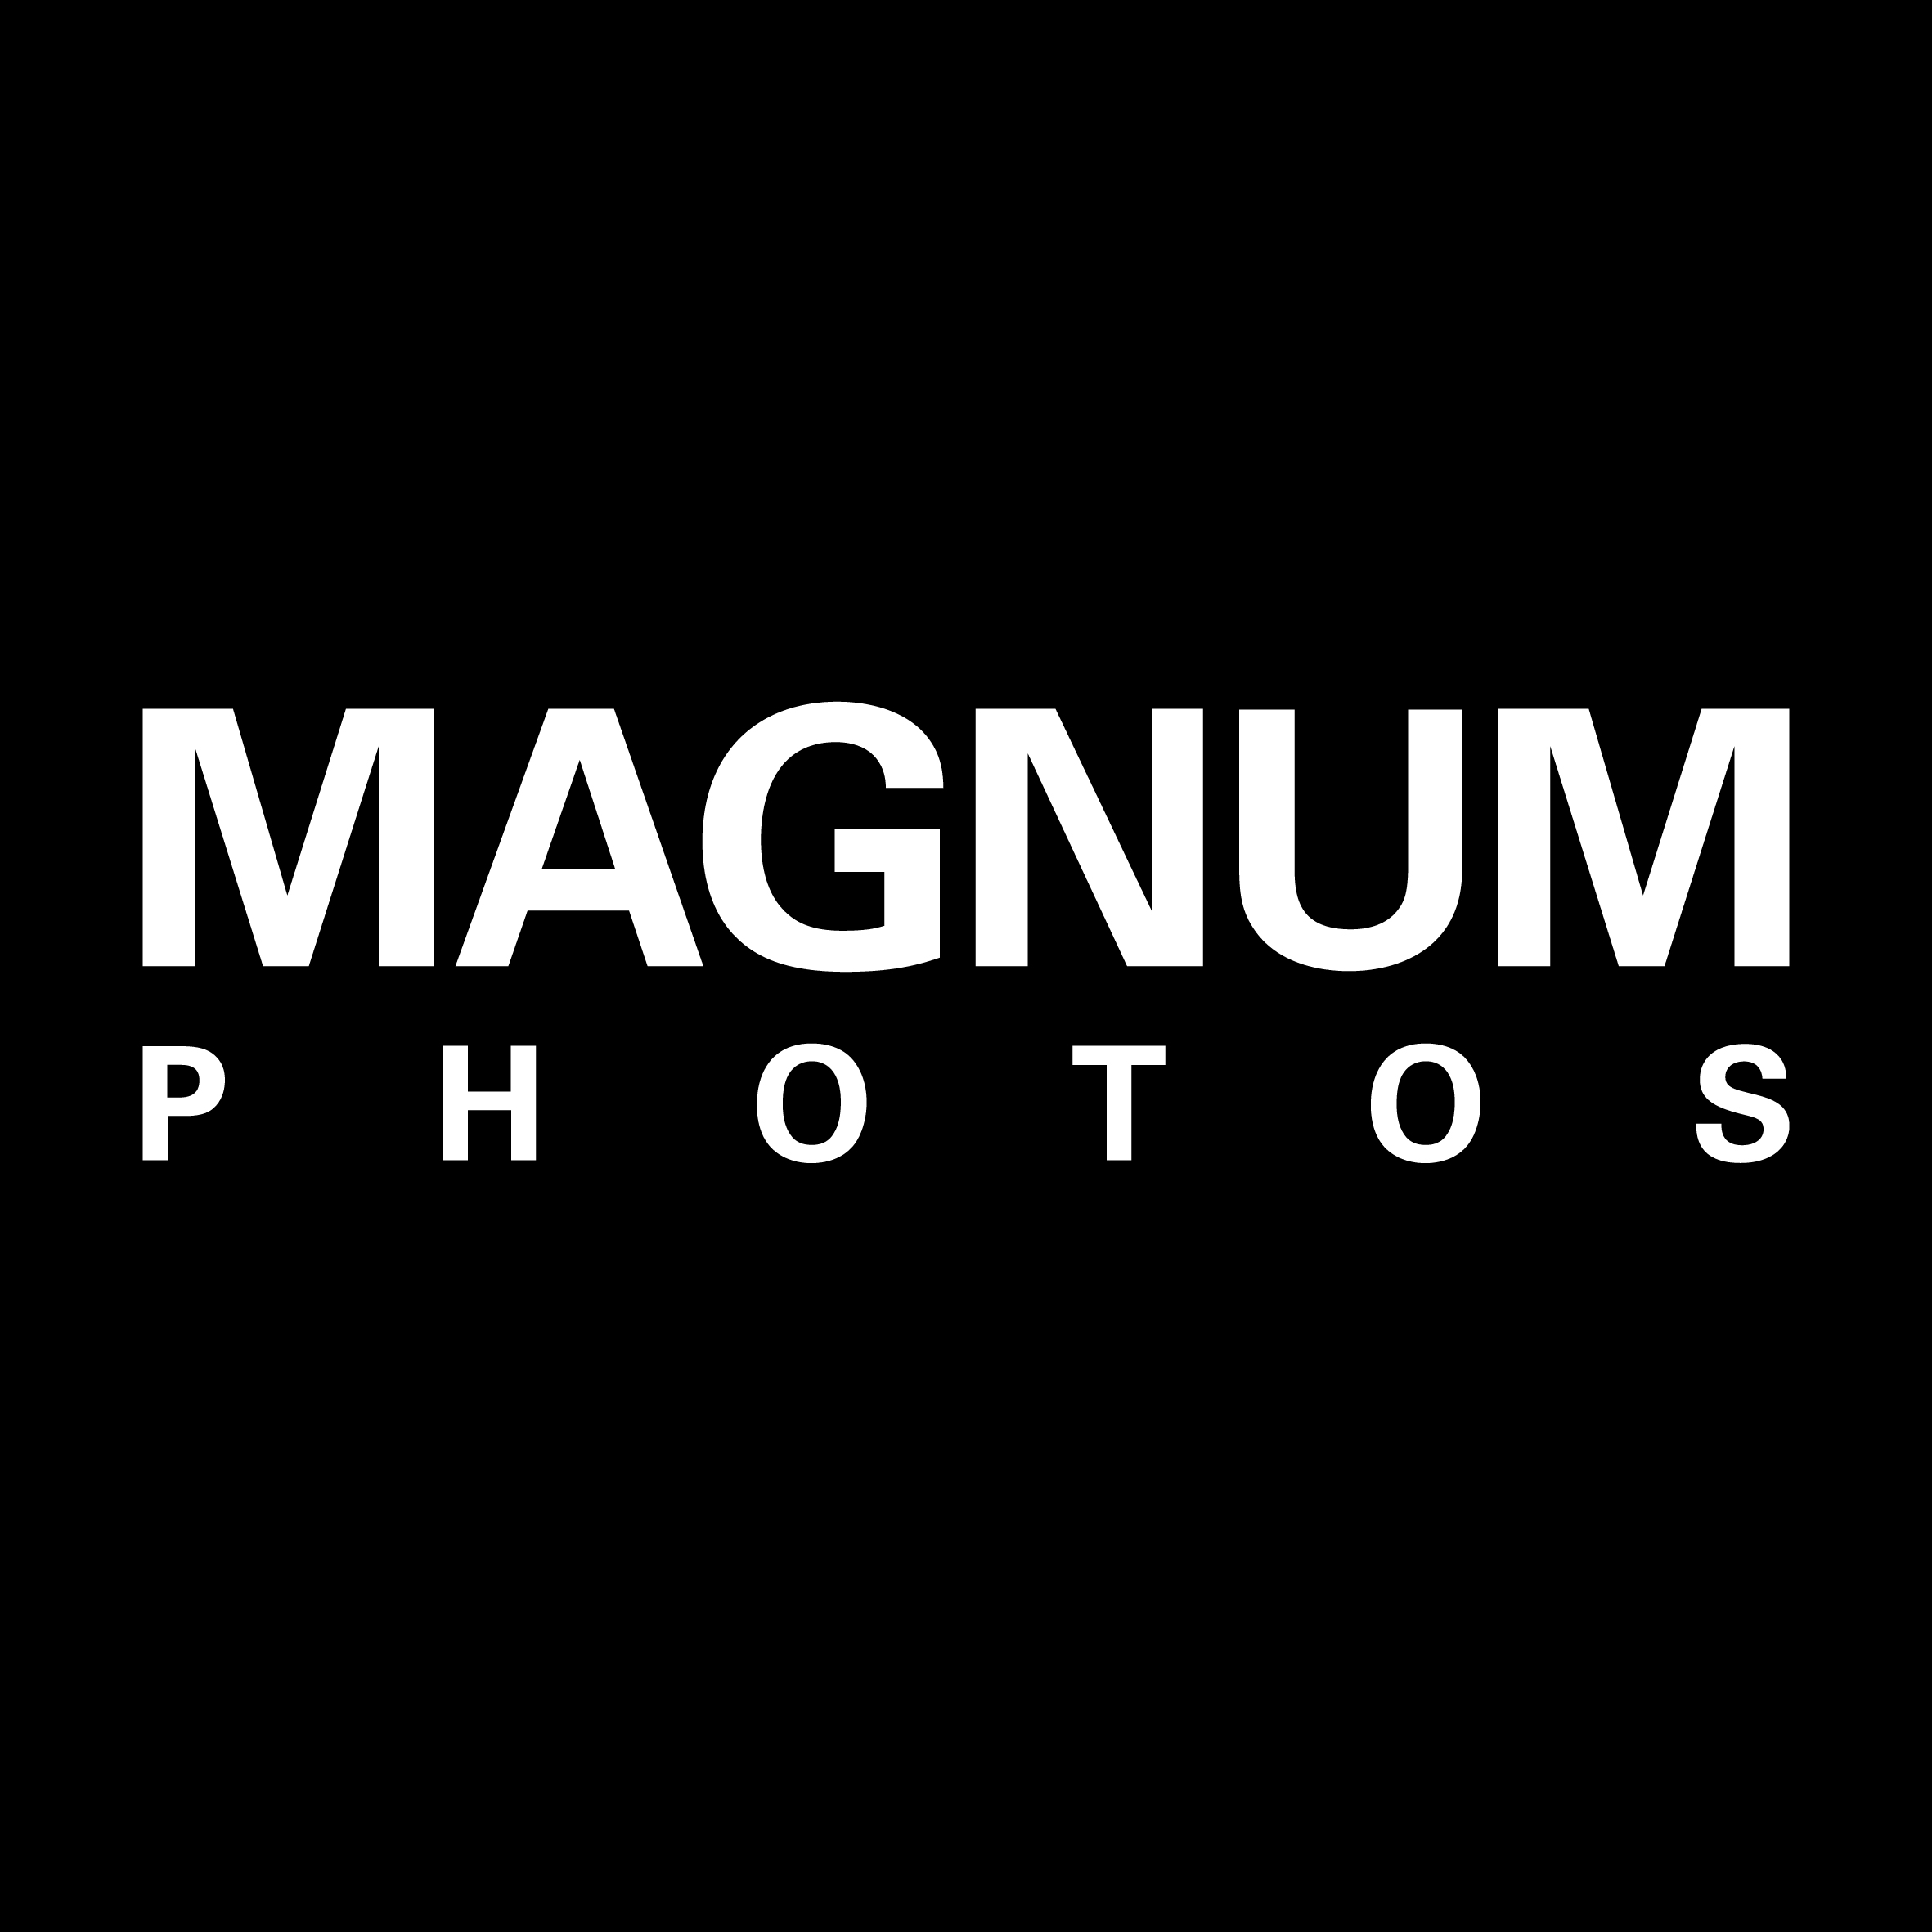 Magnum Wallpapers